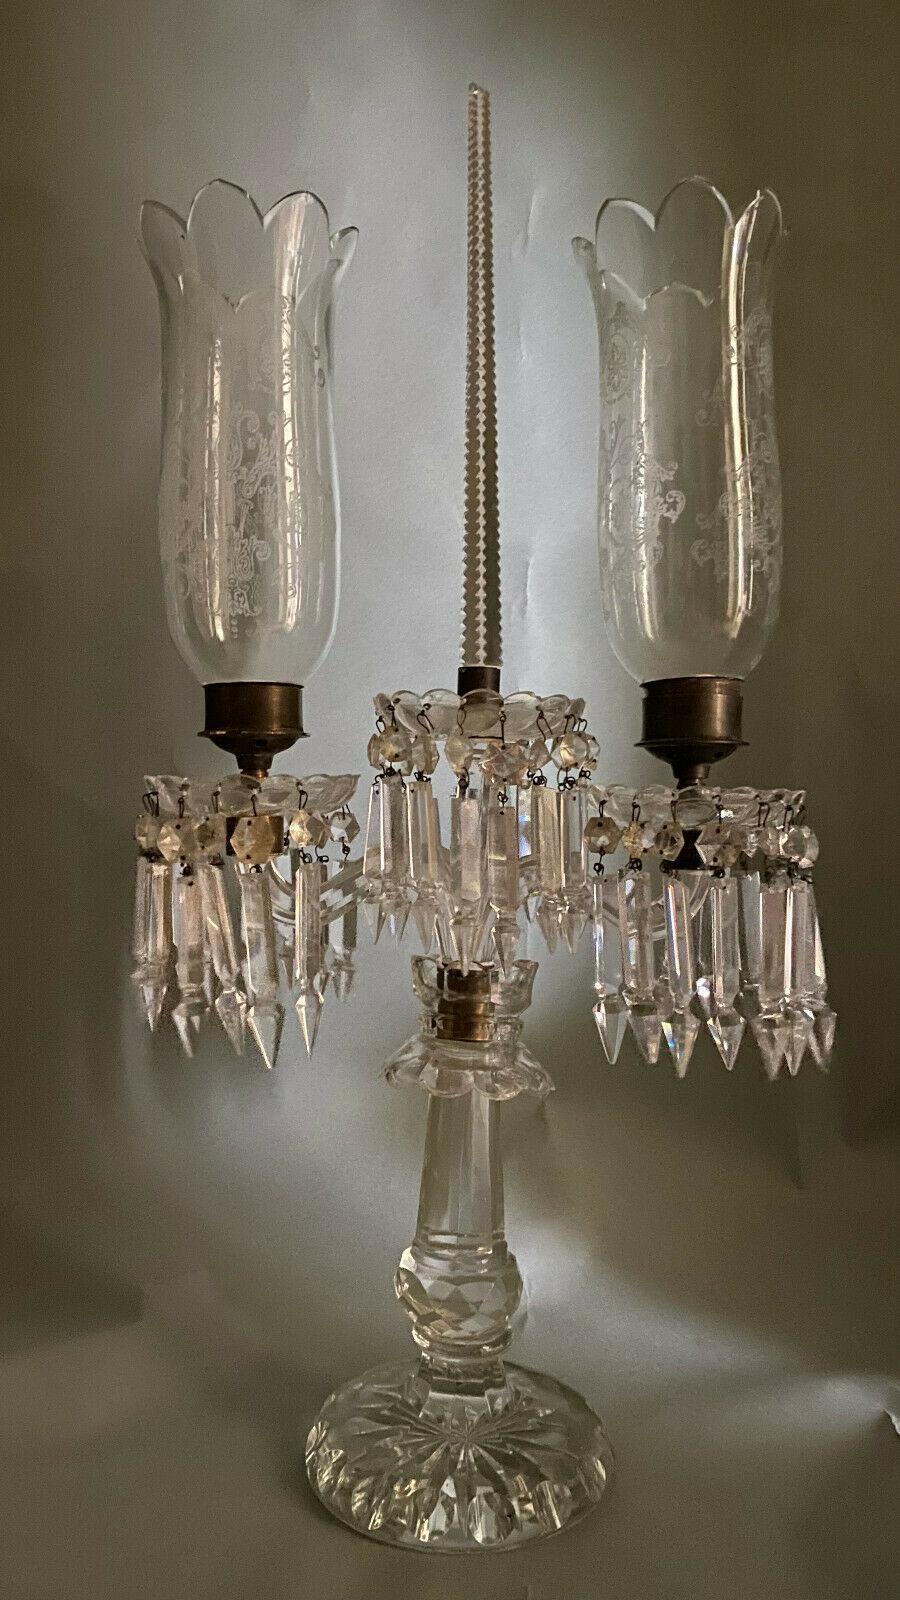 19thc French Napoleon III Cut Crystal Candelabra attributed to Baccarat  In Good Condition For Sale In Opa Locka, FL